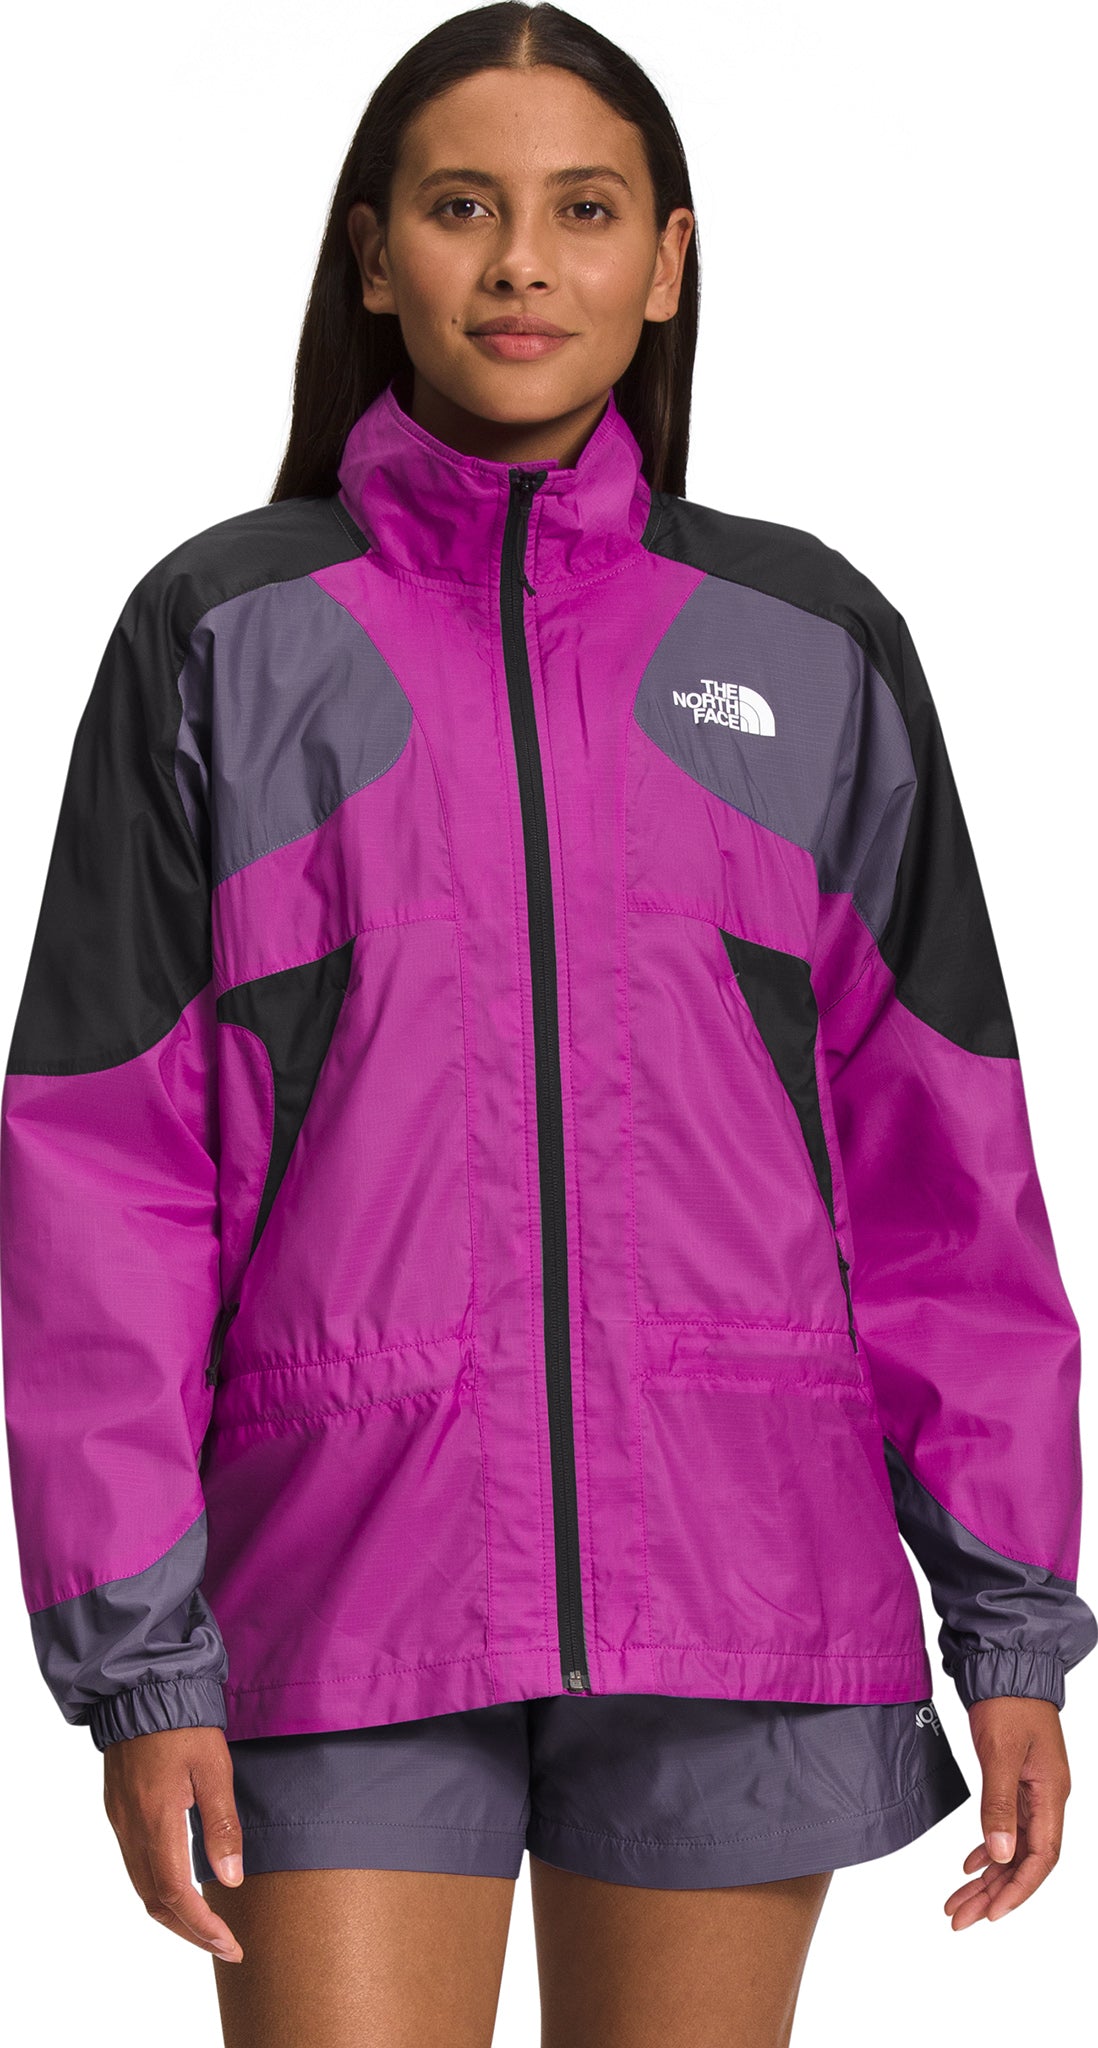 The North Face TNF X Jacket - Women's | Altitude Sports